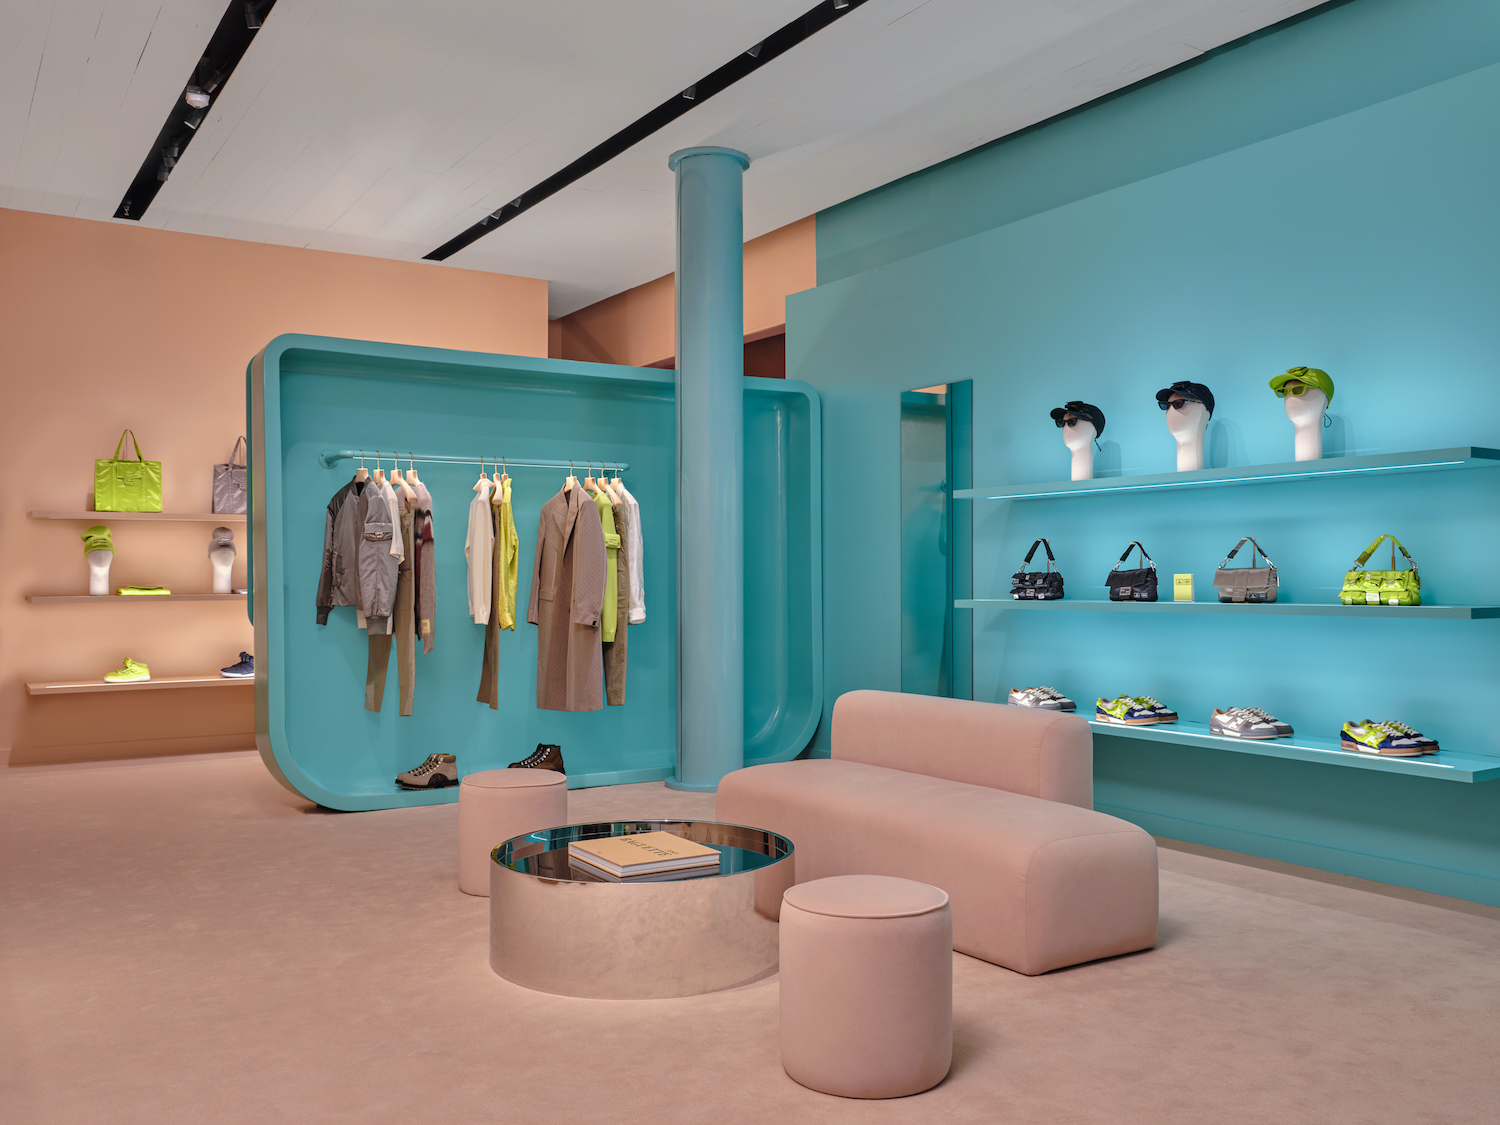 Fendi celebrates the opening of its first boutique in Brazil with